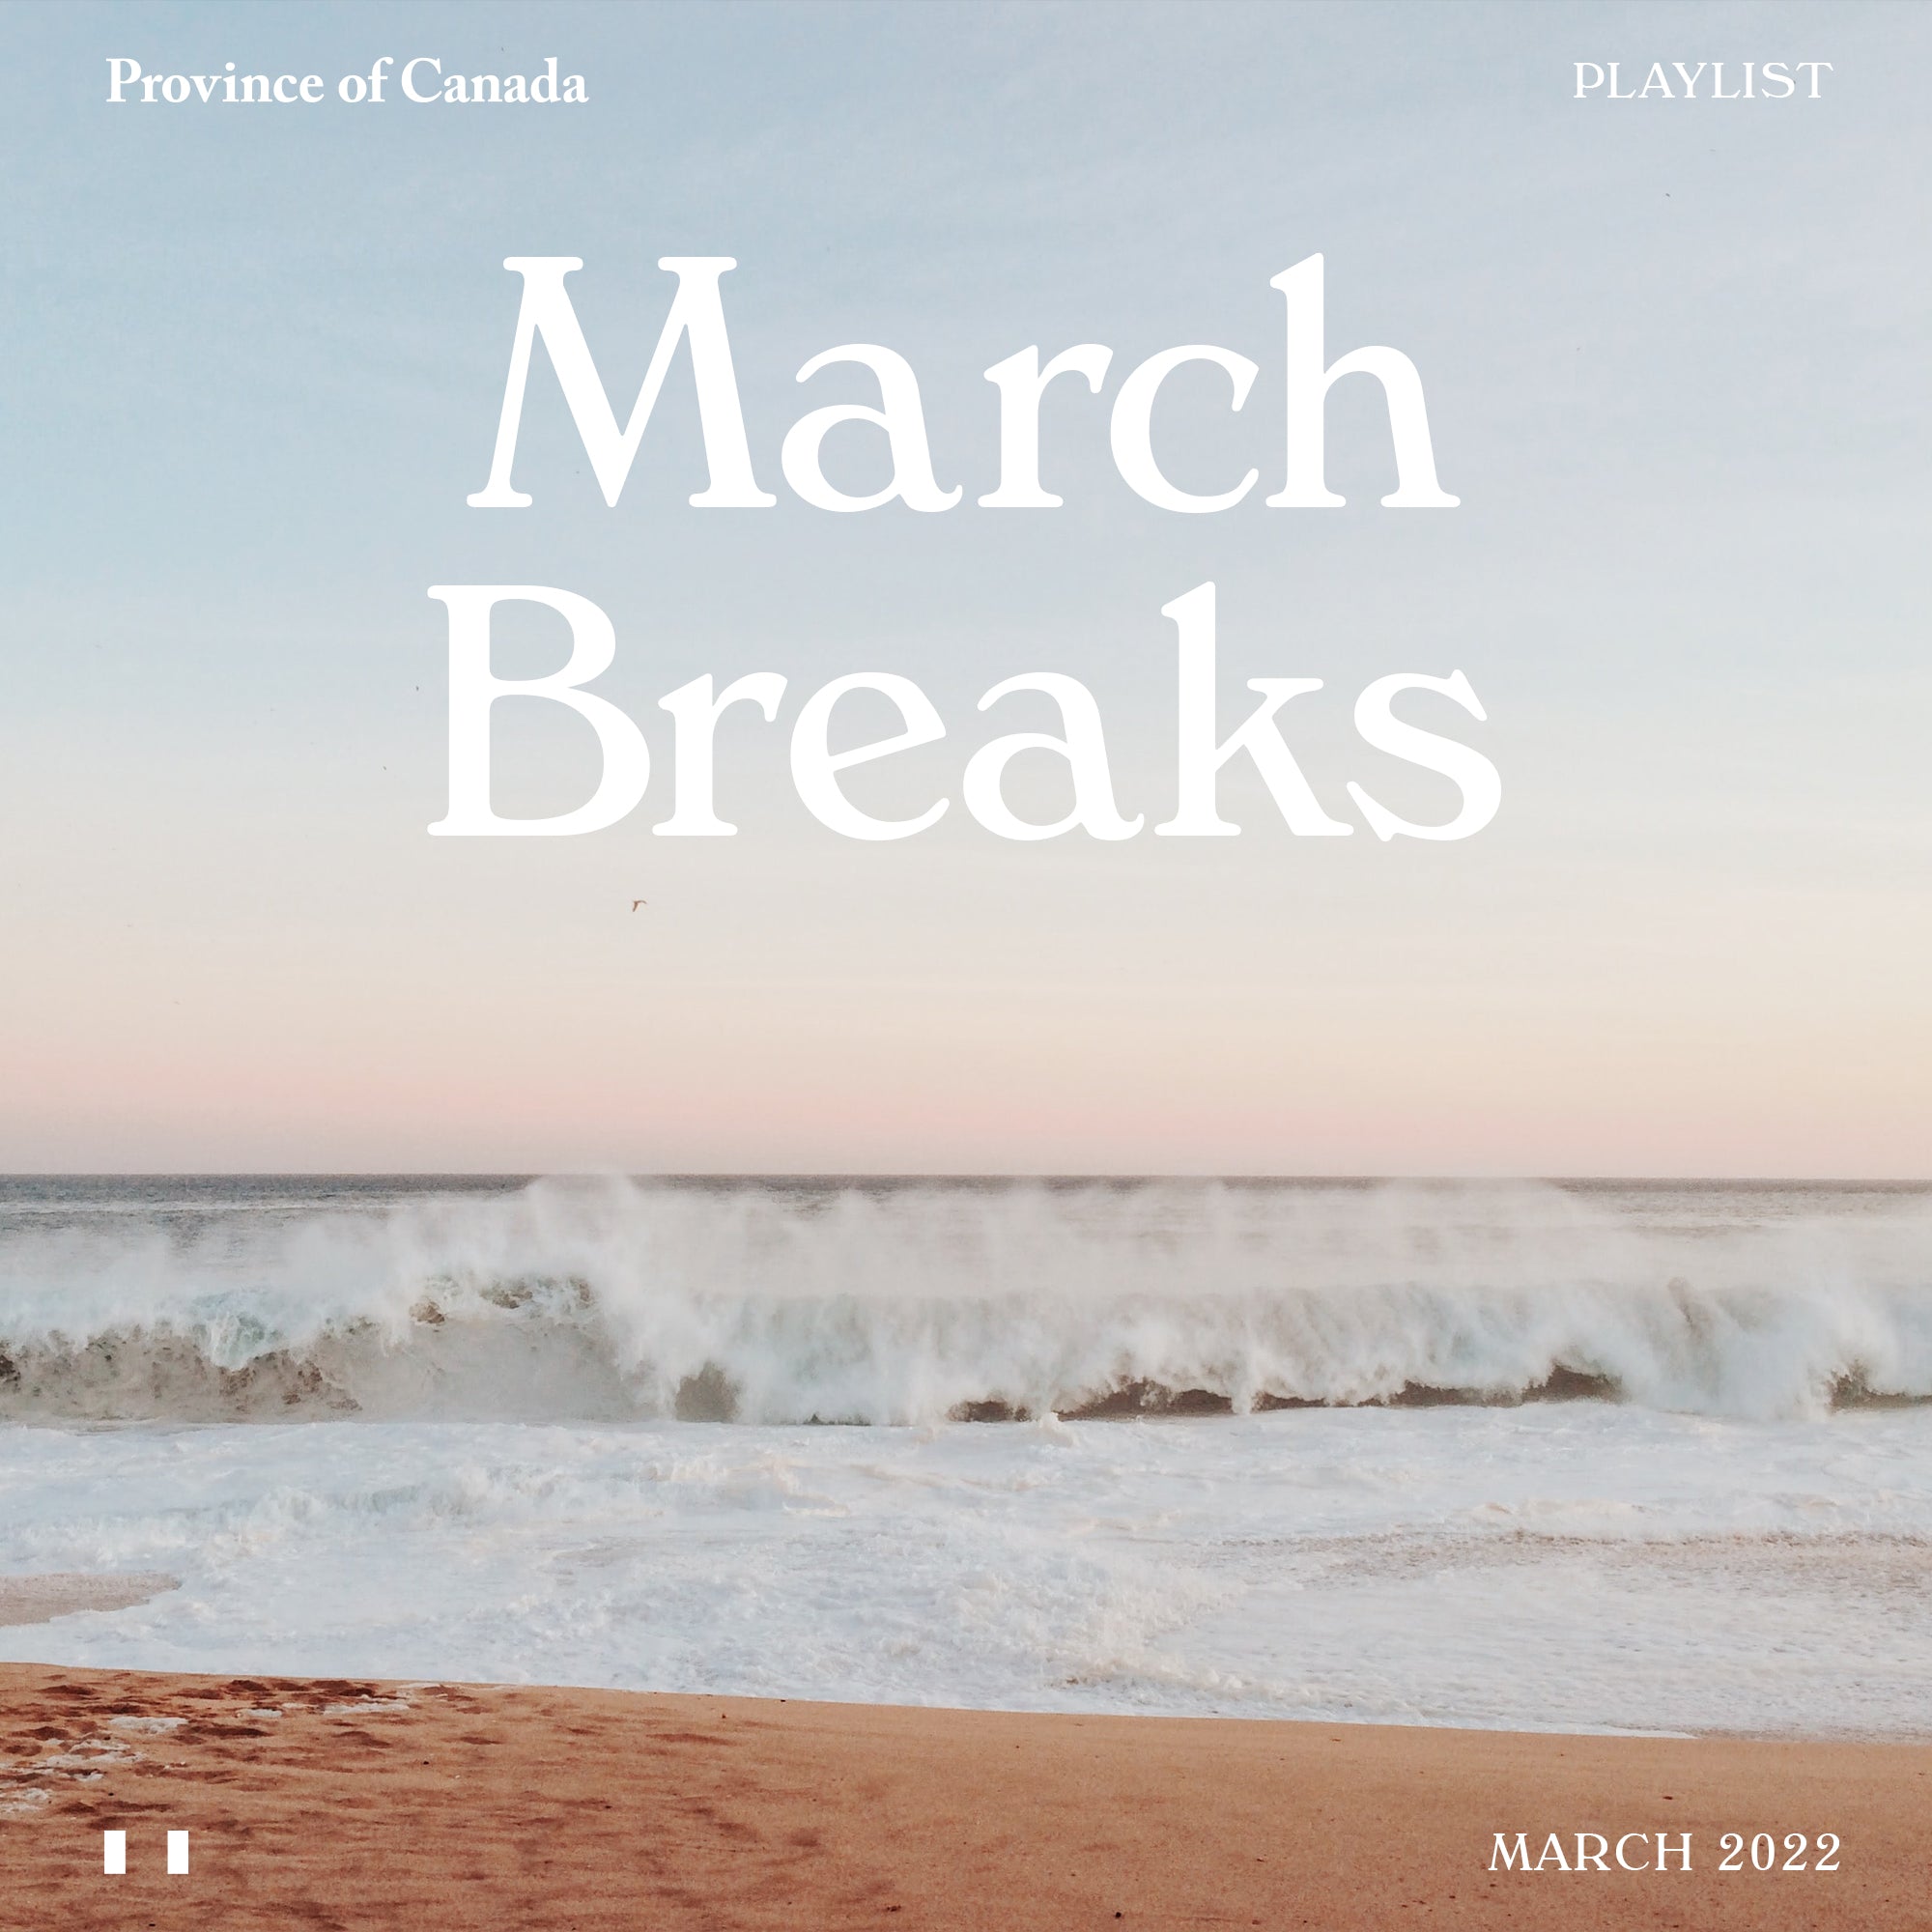 Province of Canada - Playlist - March Breaks